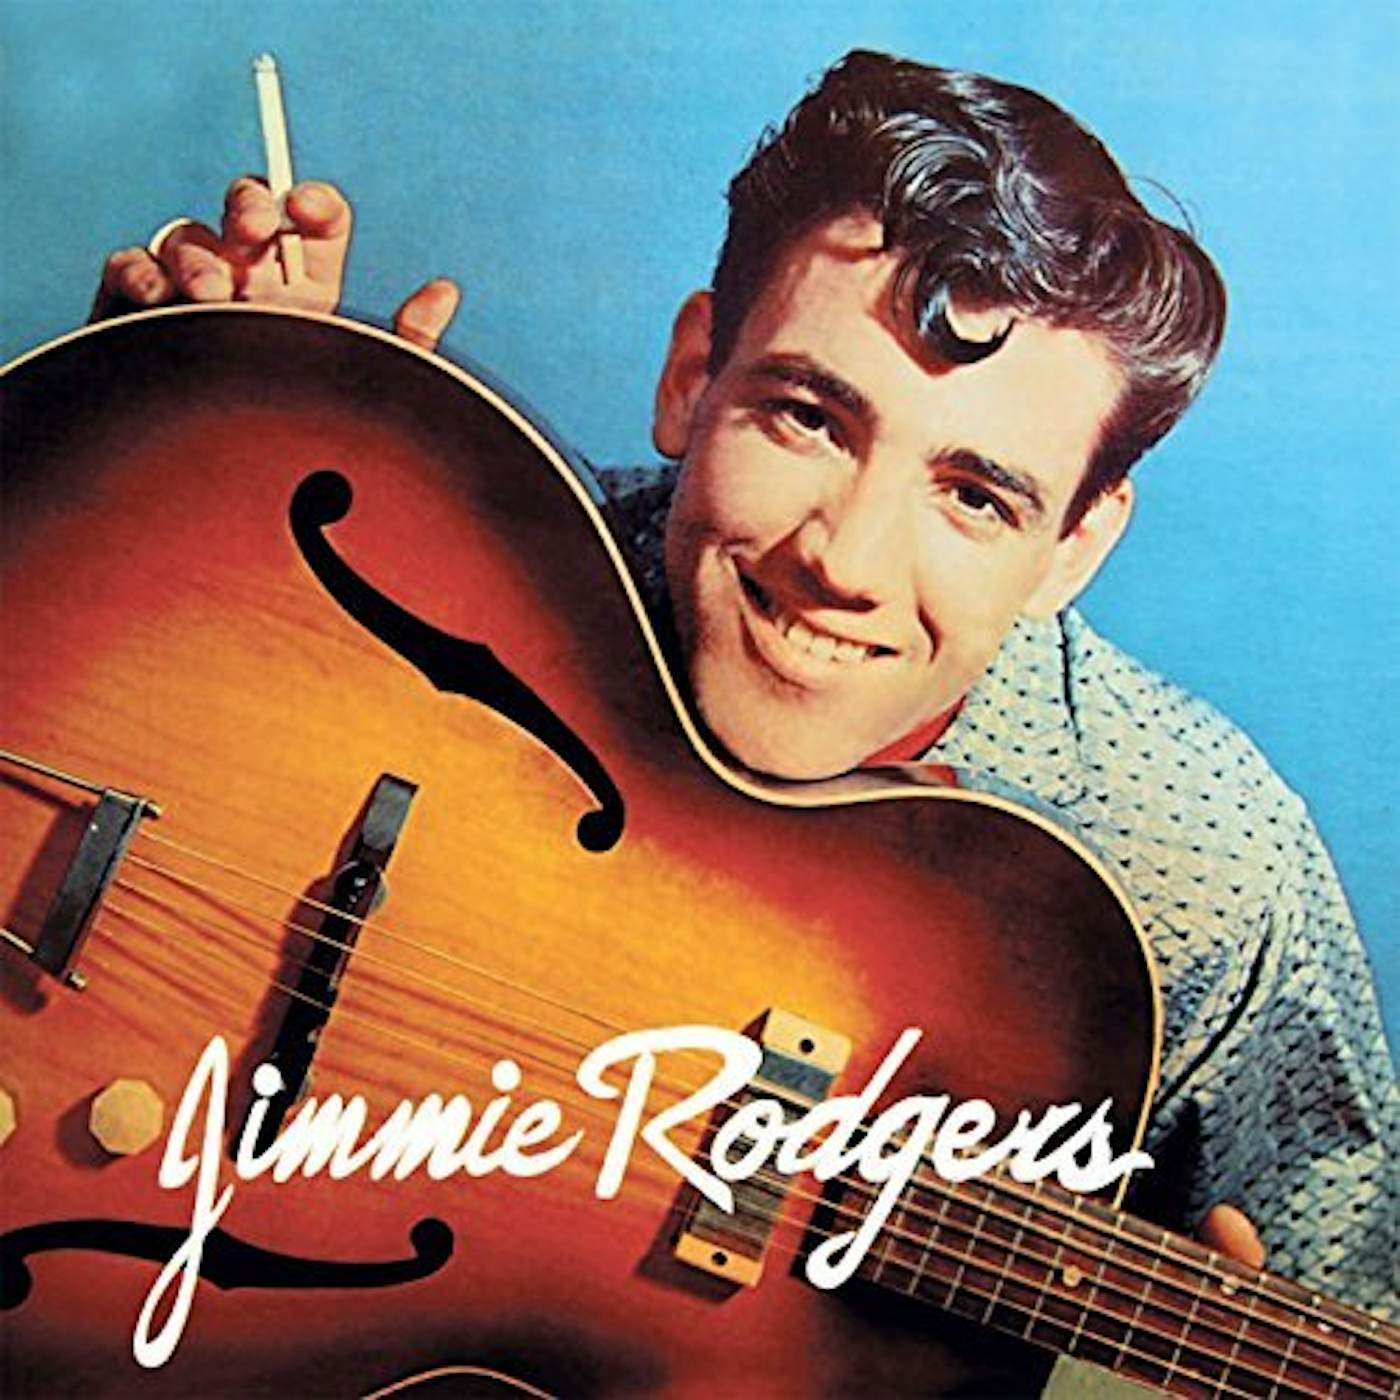 JIMMIE RODGERS CD